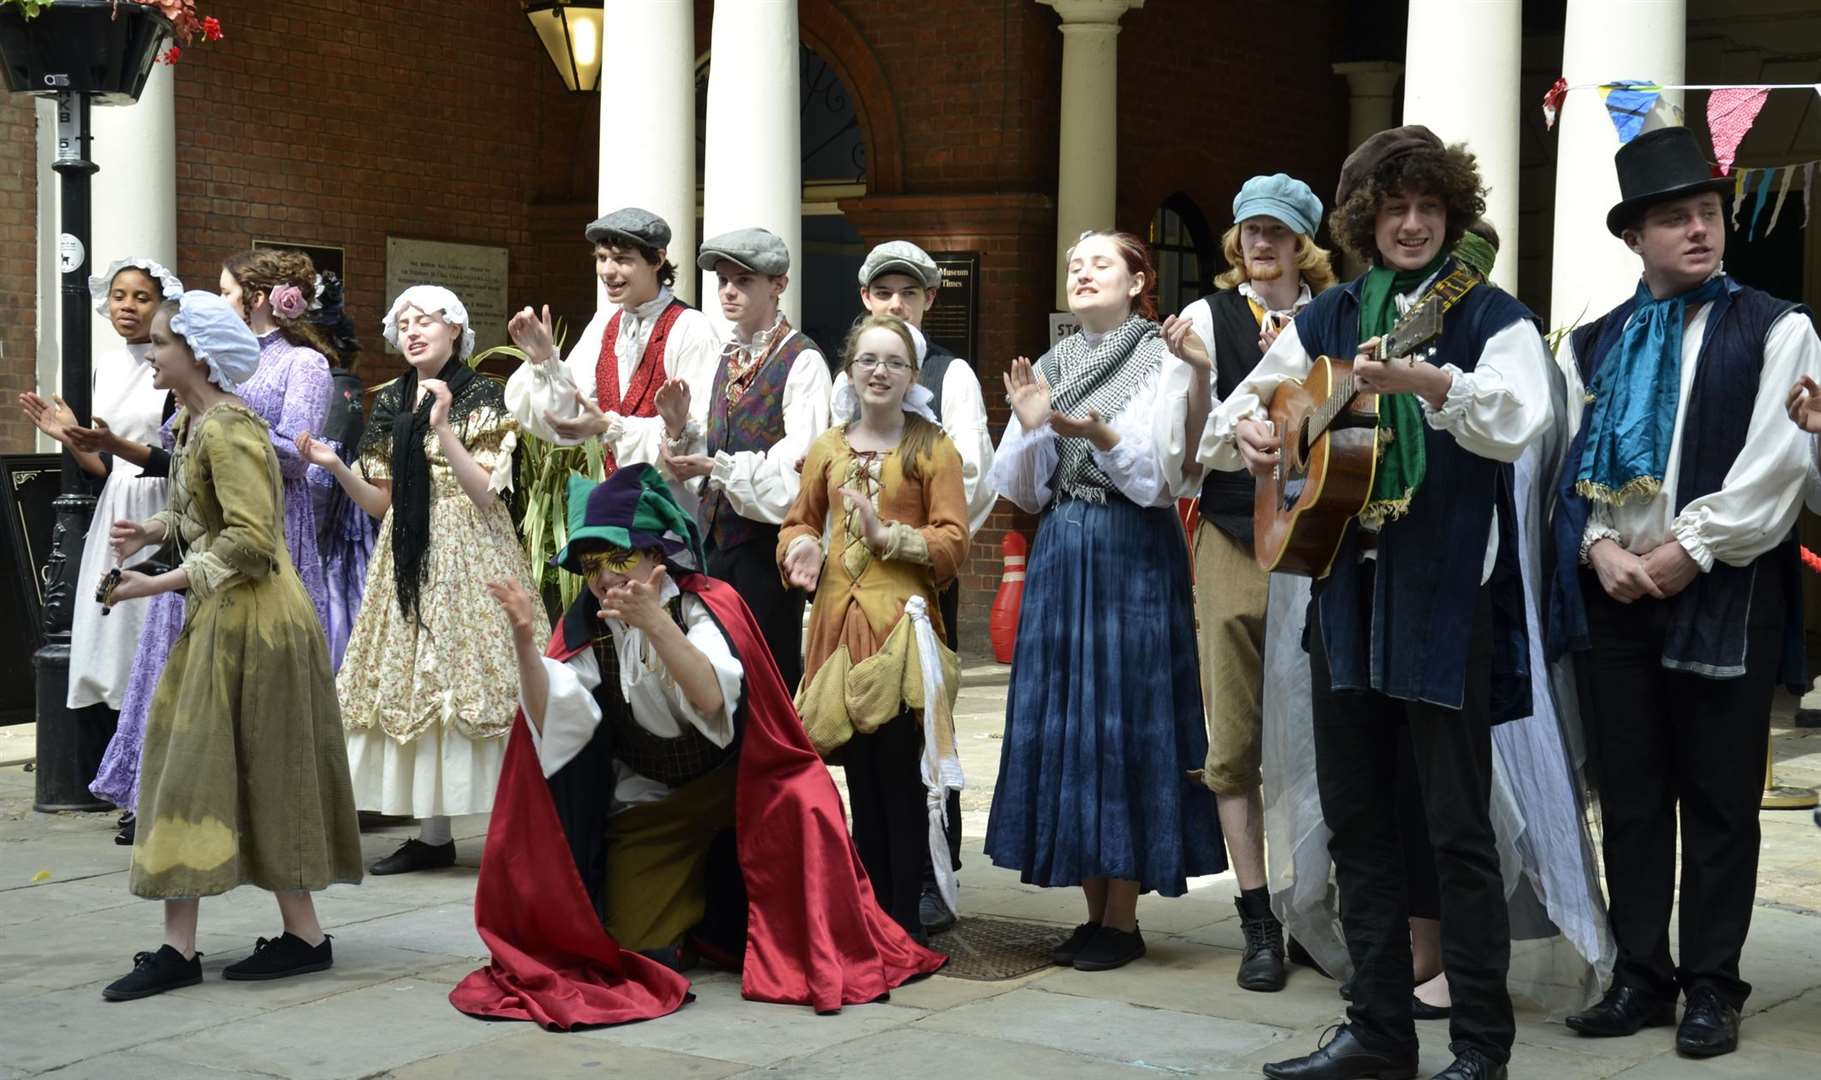 As well as the parades, there will be live music and street performers to entertain the crowds at the Rochester Dickens Festival